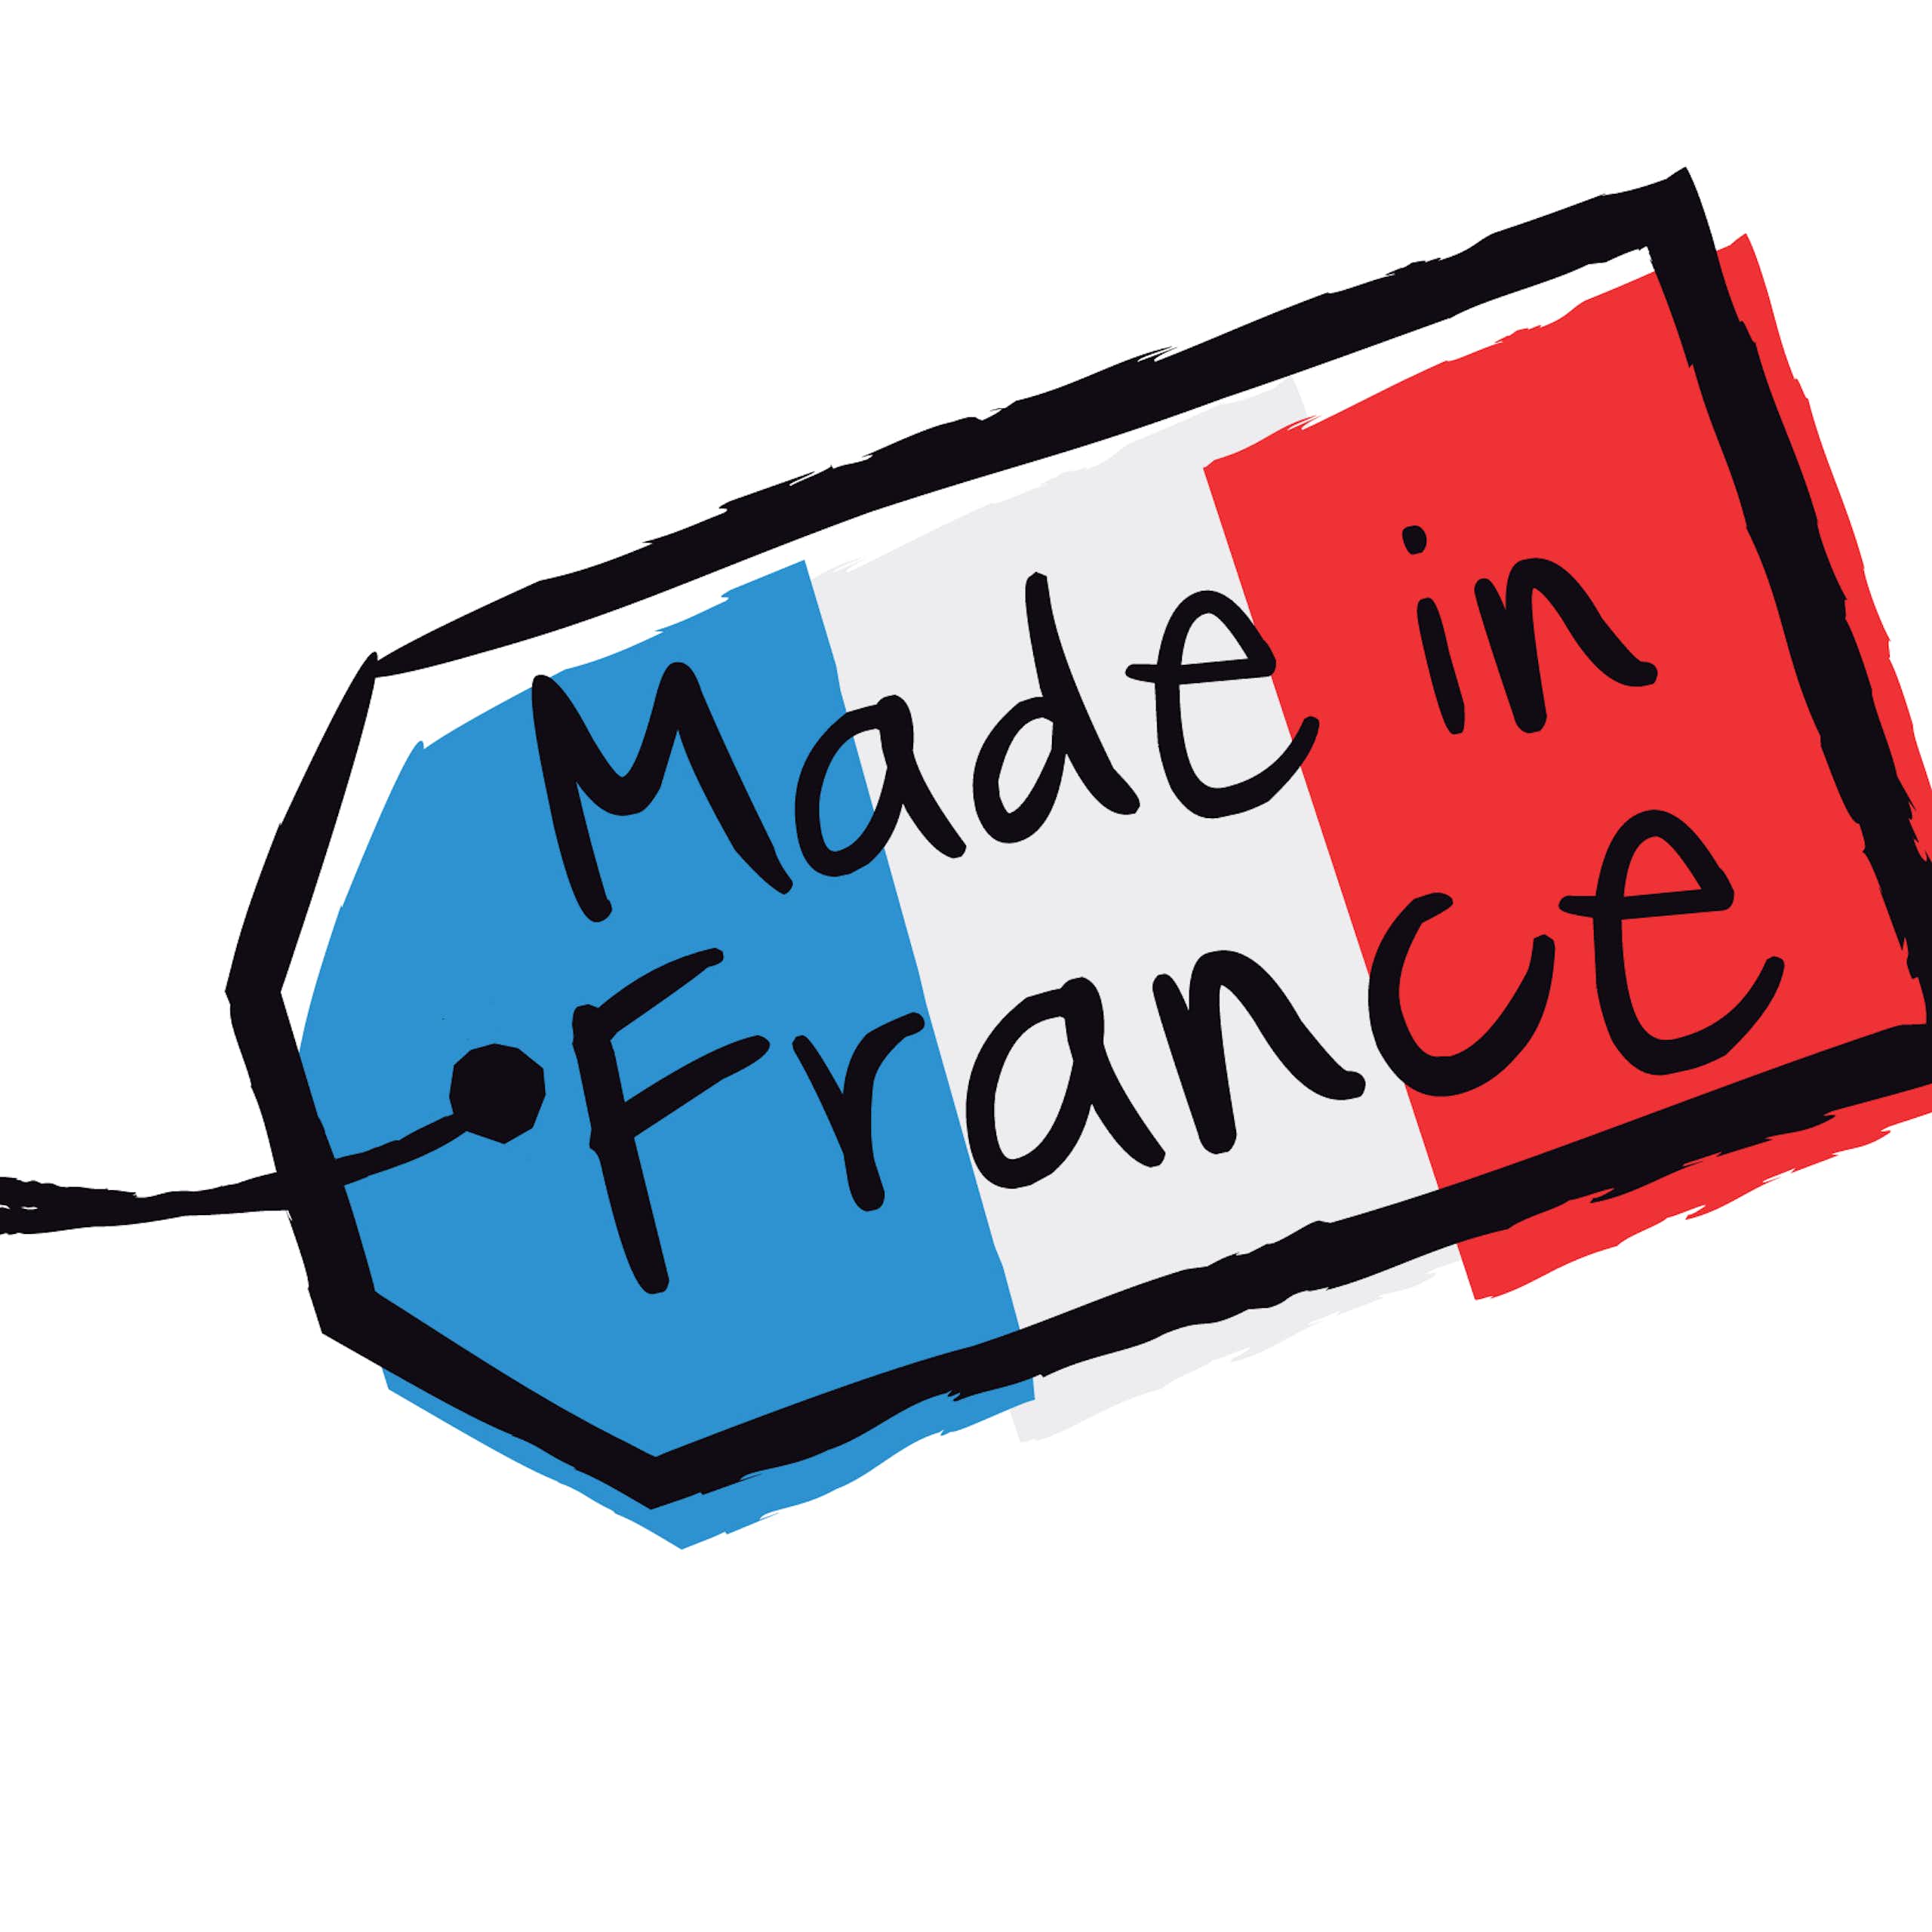 Contrairement au « Made in France », le « Made by France » se porte (relativement) bien